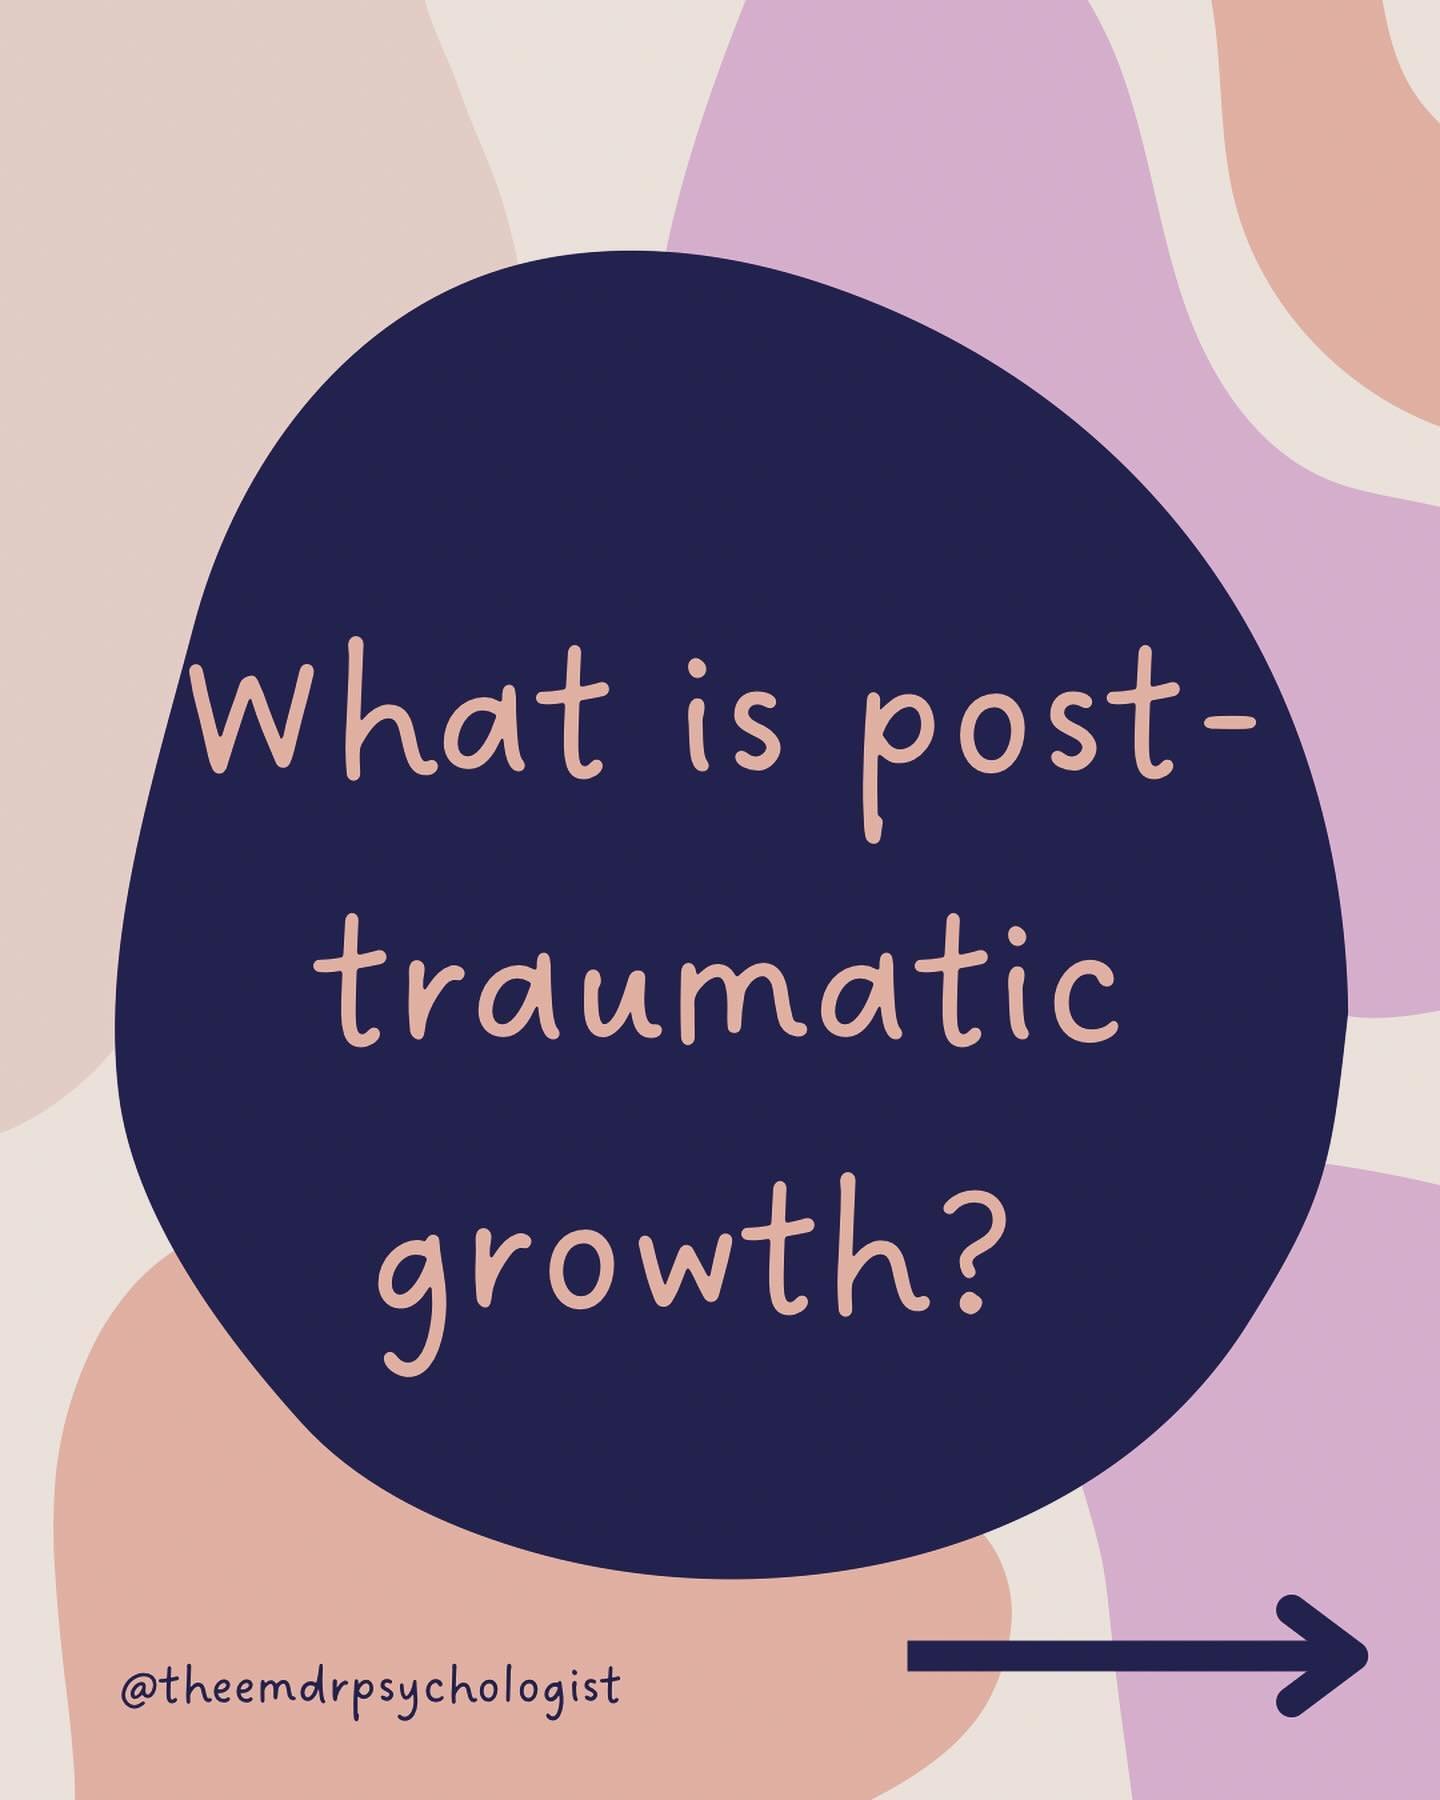 Postraumatic growth is a positive that comes out of trauma. Going through an adverse life experience or multiple experiences can shift your perspective on everything, and that can lead to a positive shift in some areas of your life.

According to Ted